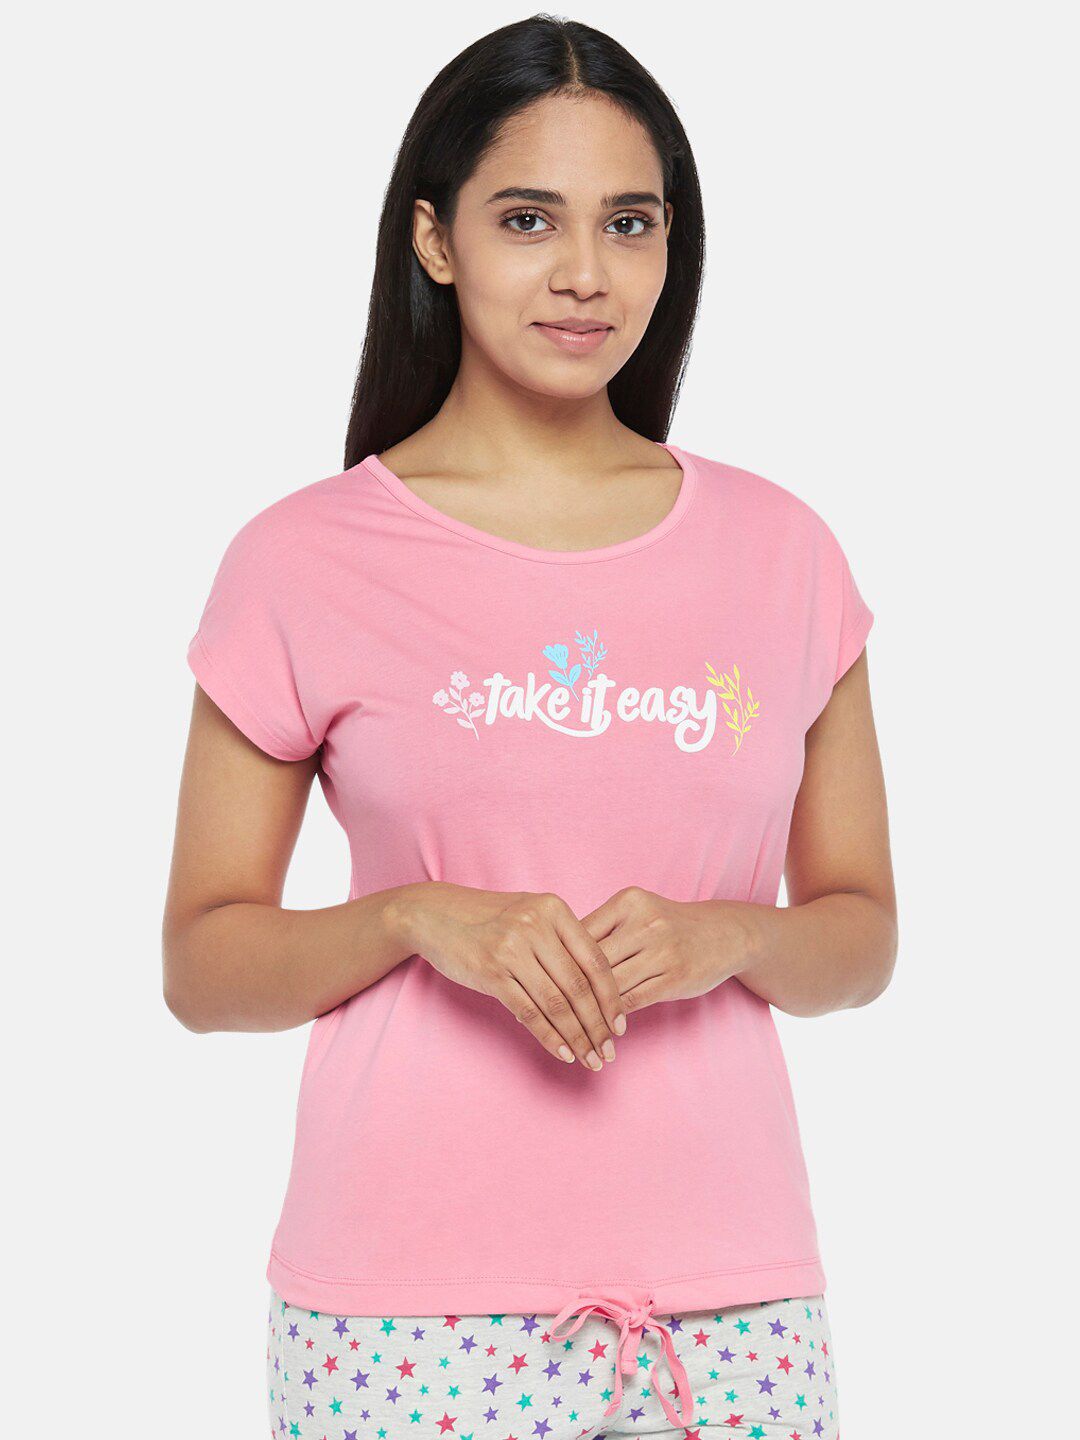 Dreamz by Pantaloons Women Pink Typography Printed Lounge T-shirt Price in India